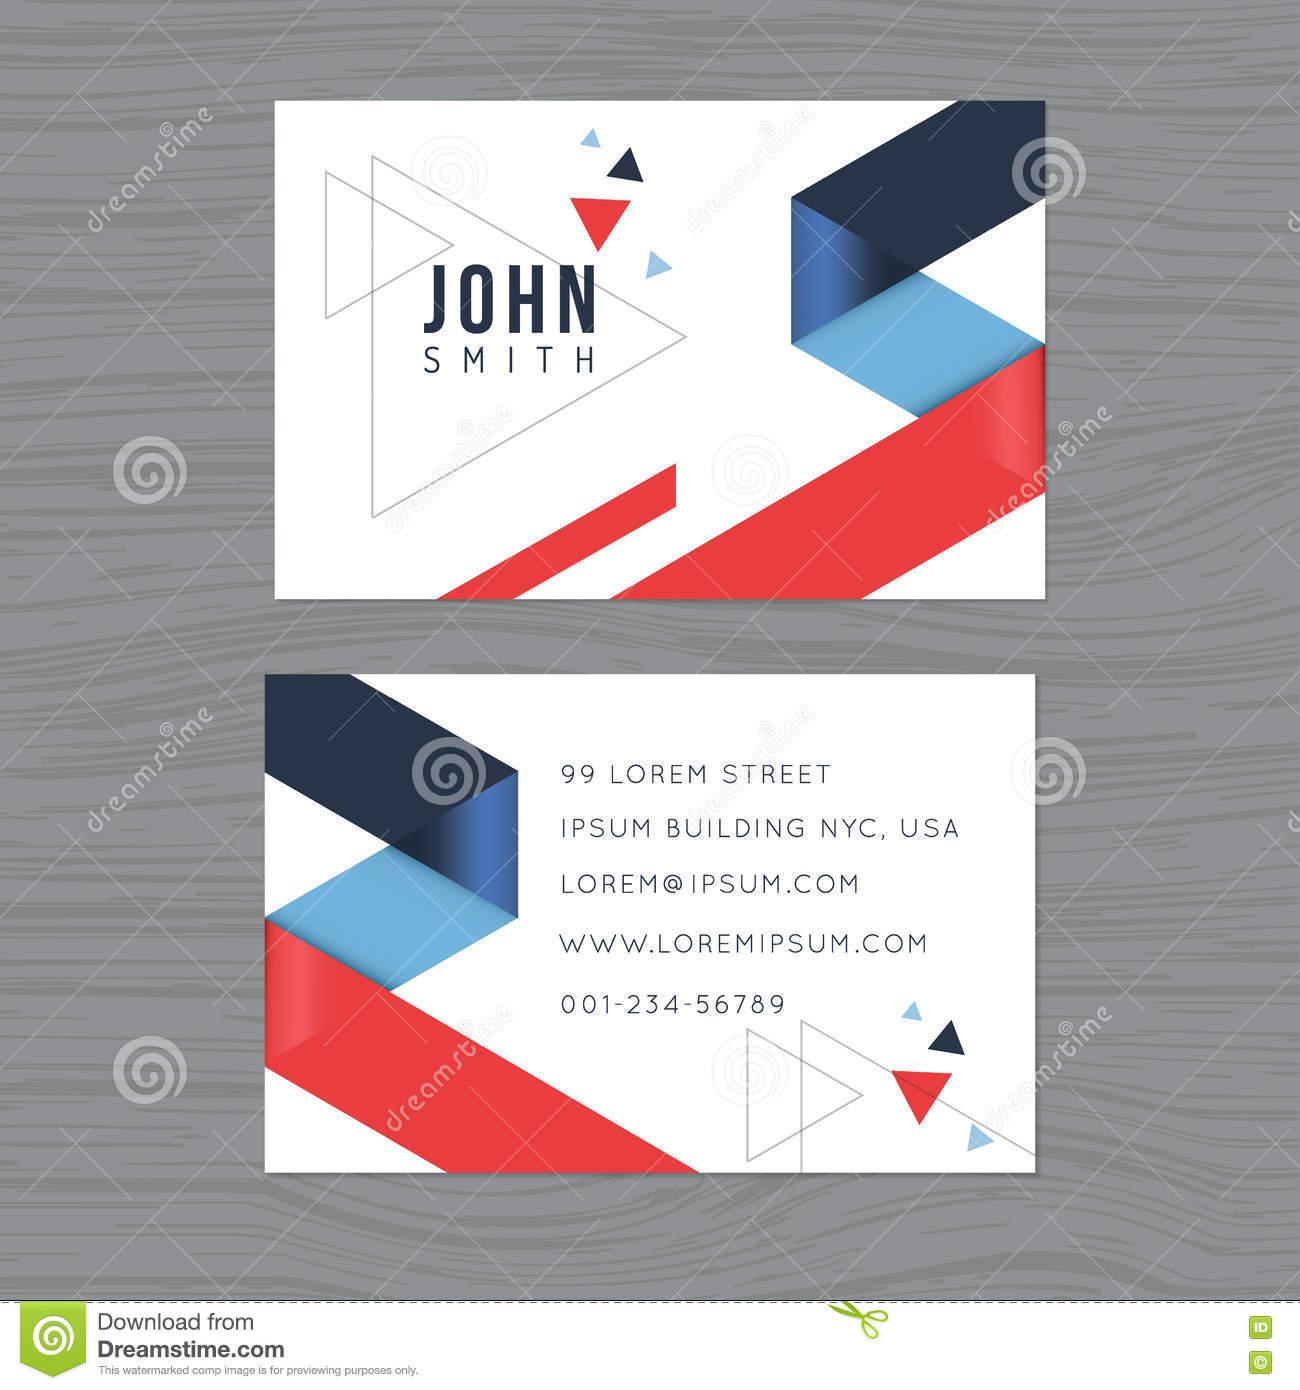 Blue with a Red Triangle Logo - Modern And Clean Design Business Card Template Blue Red Triangle ...